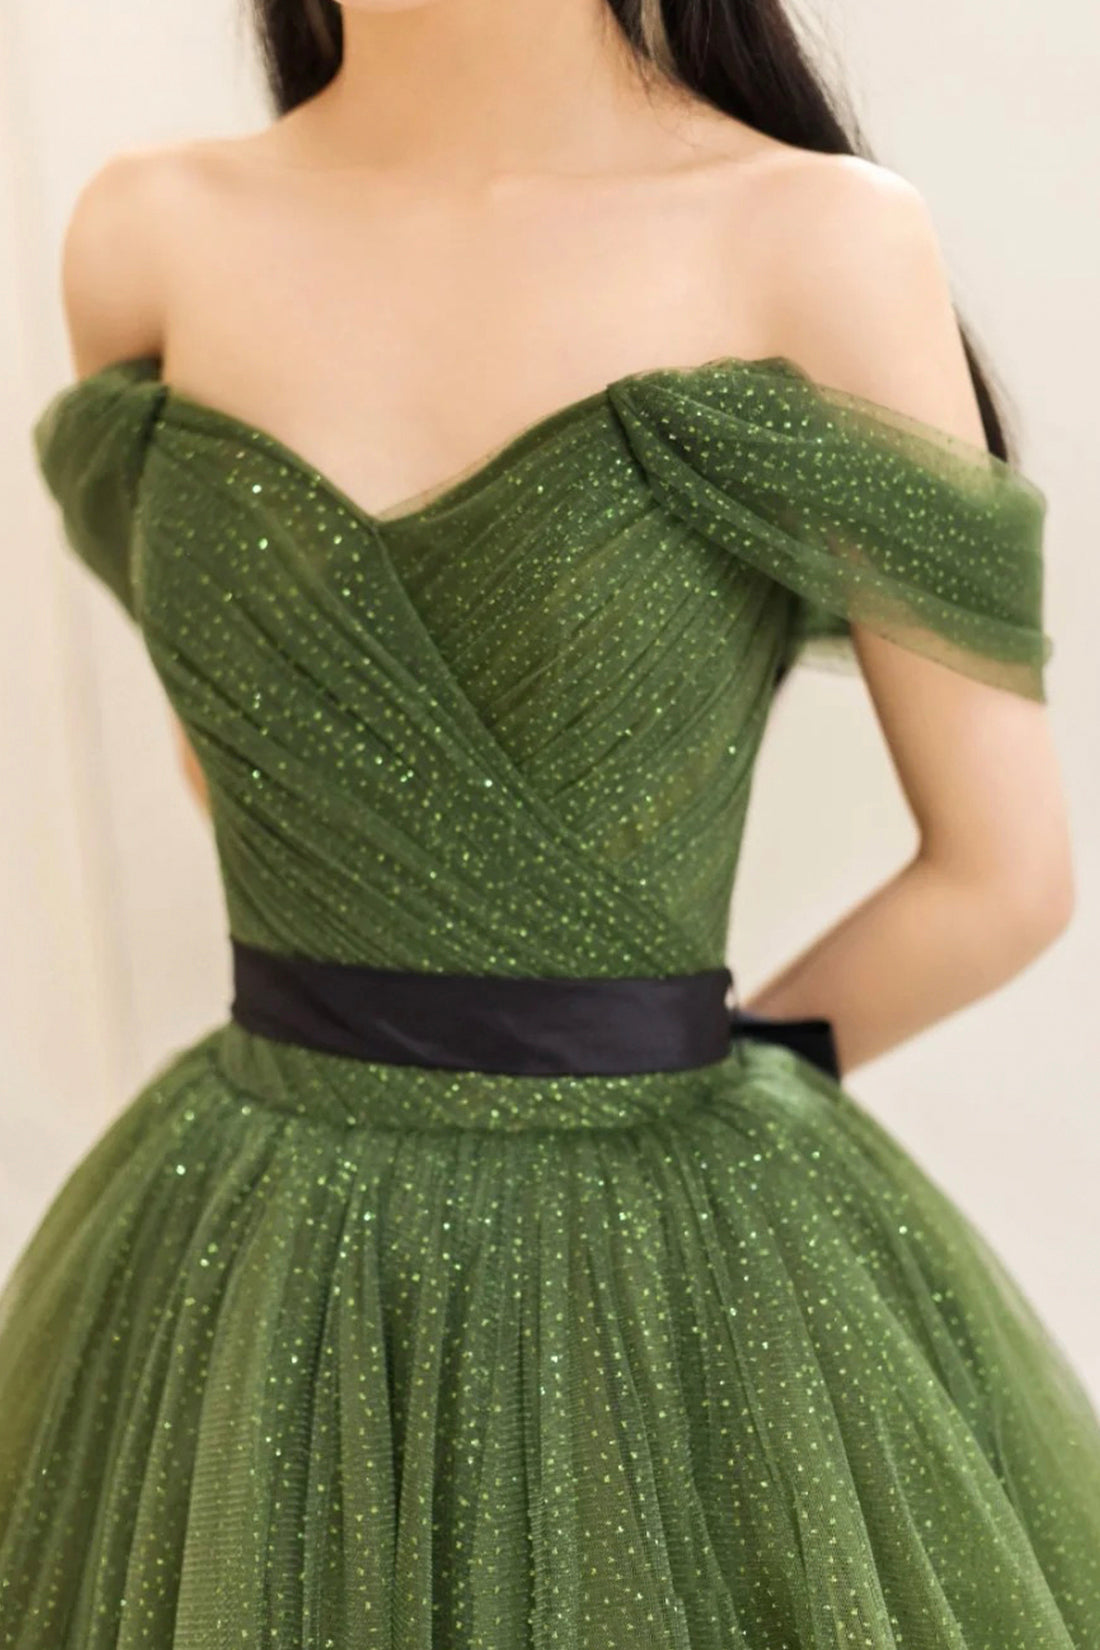 Green Tulle Floor Length Prom Dress, Beautiful Off the Shoulder Evening Party Dress